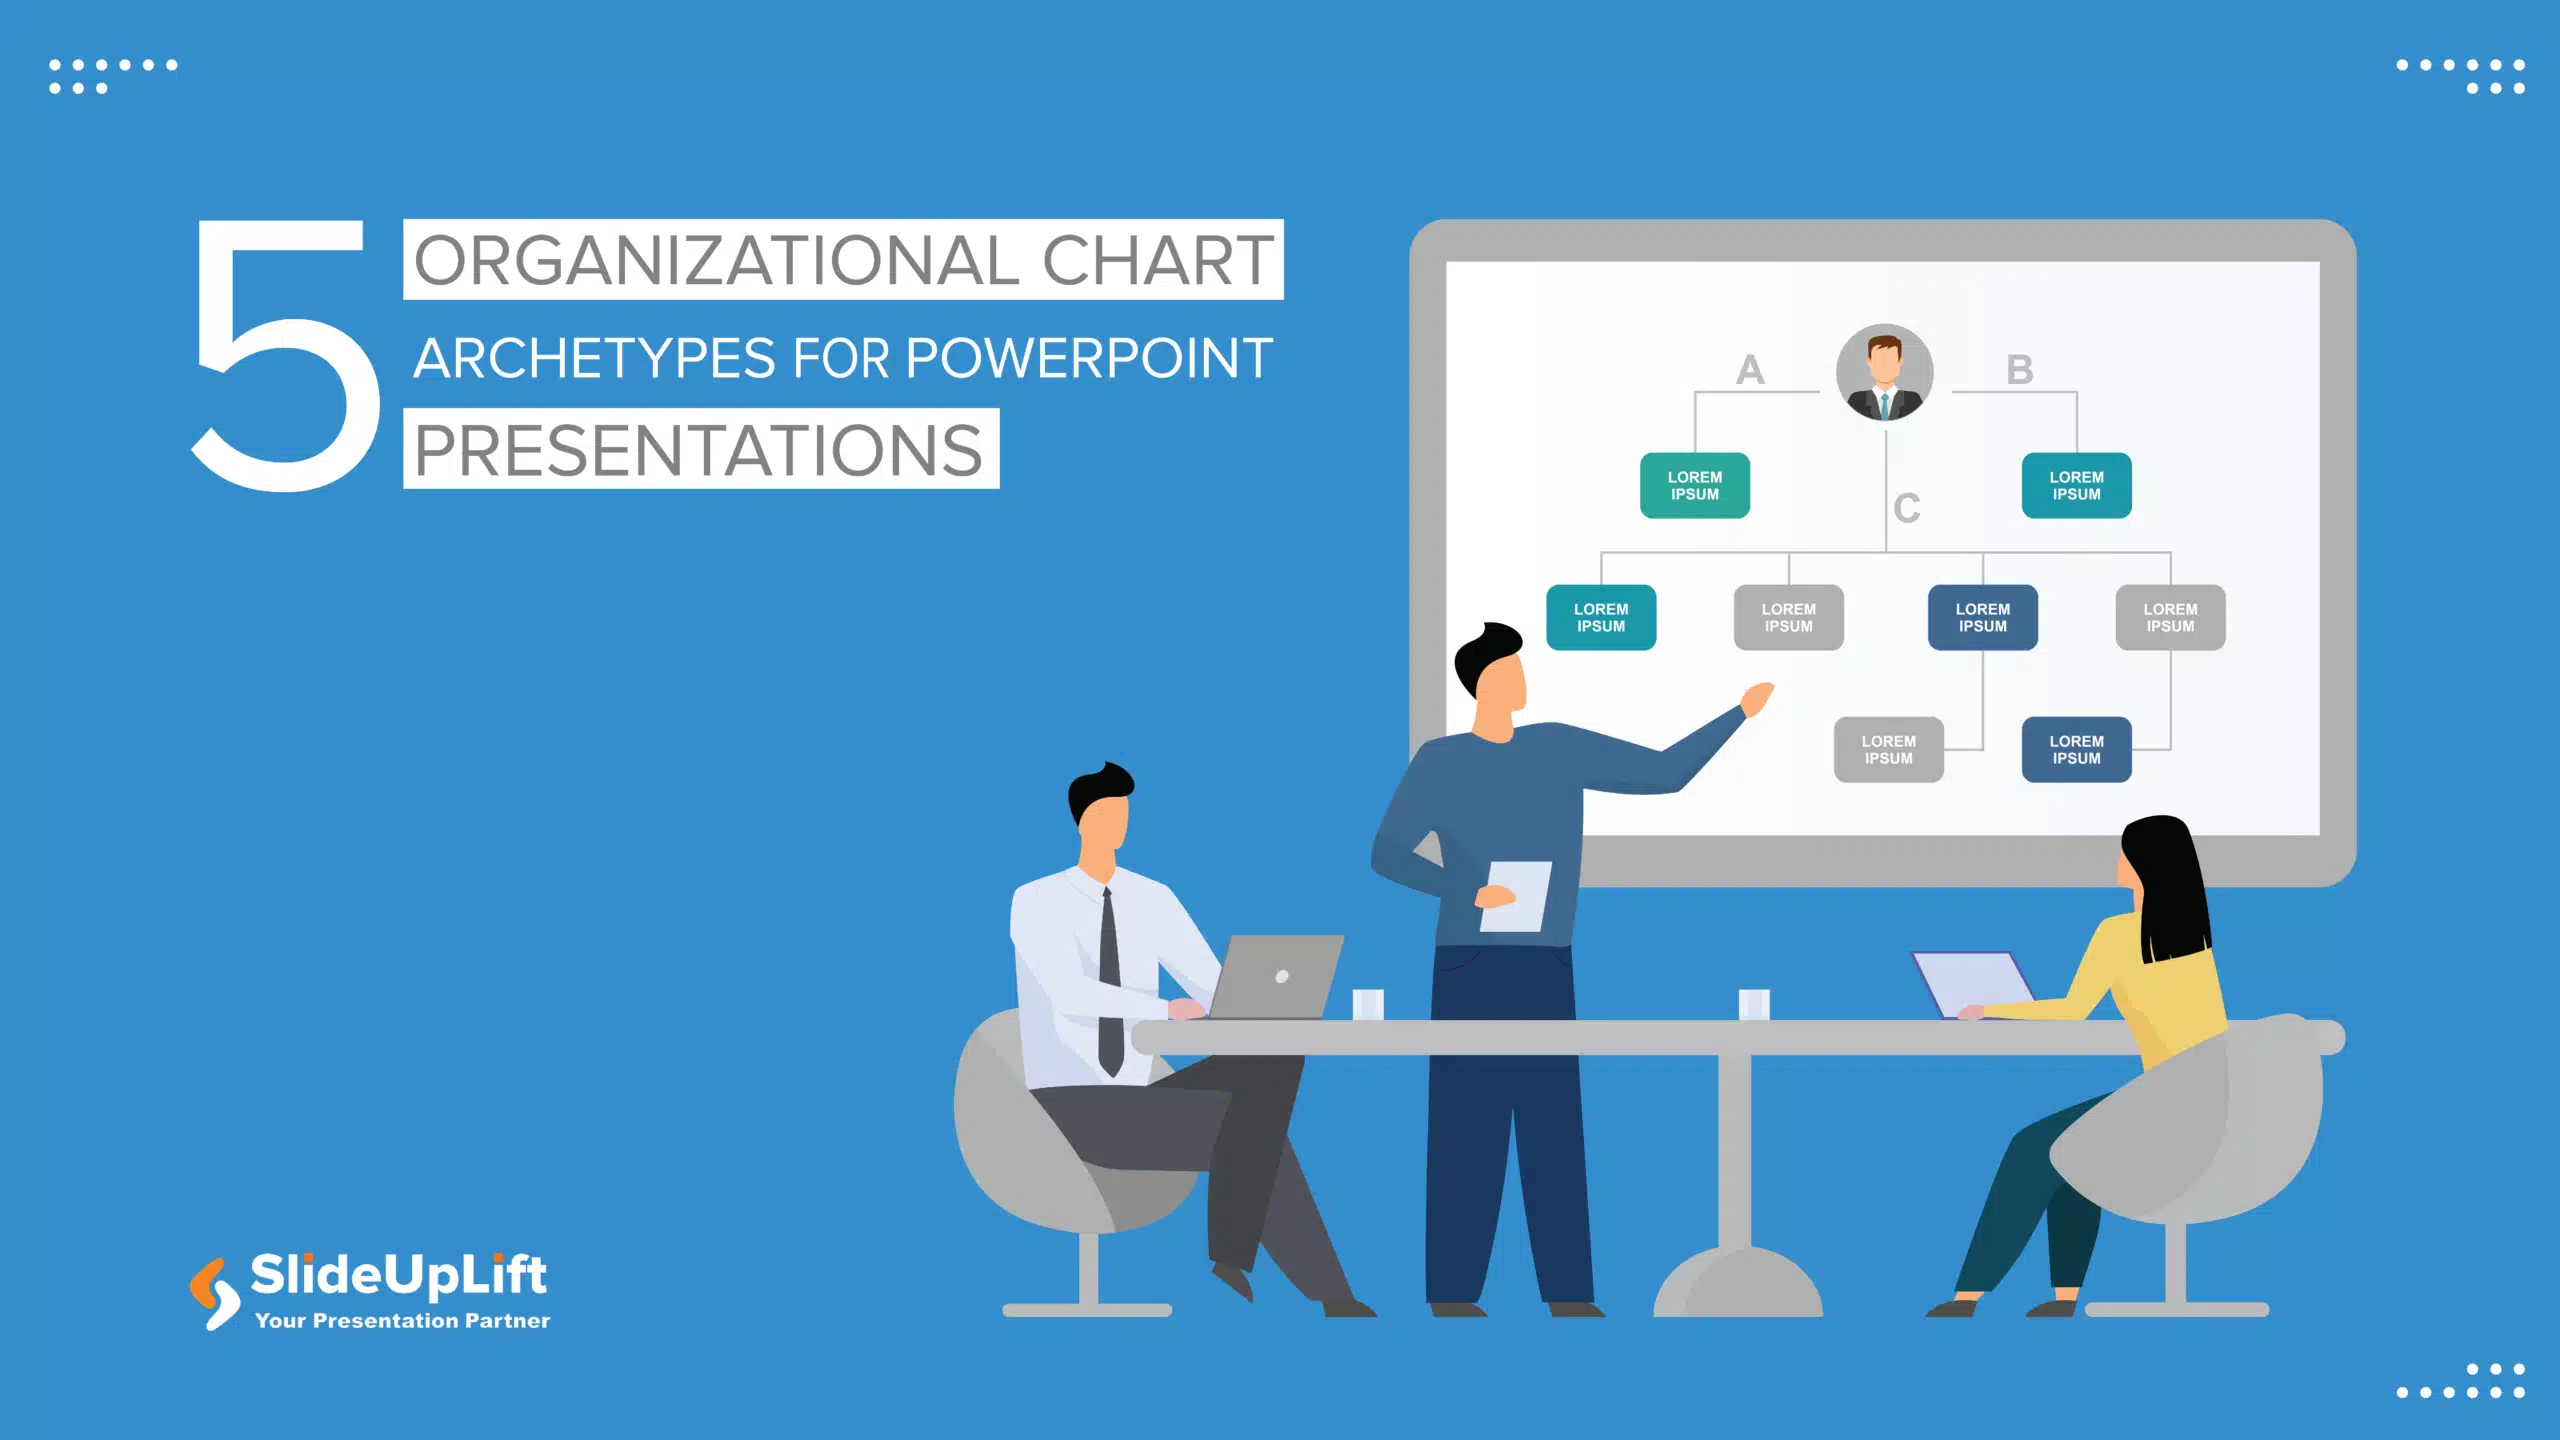 5 Organizational Chart Archetypes for PowerPoint Presentations (including Templates)